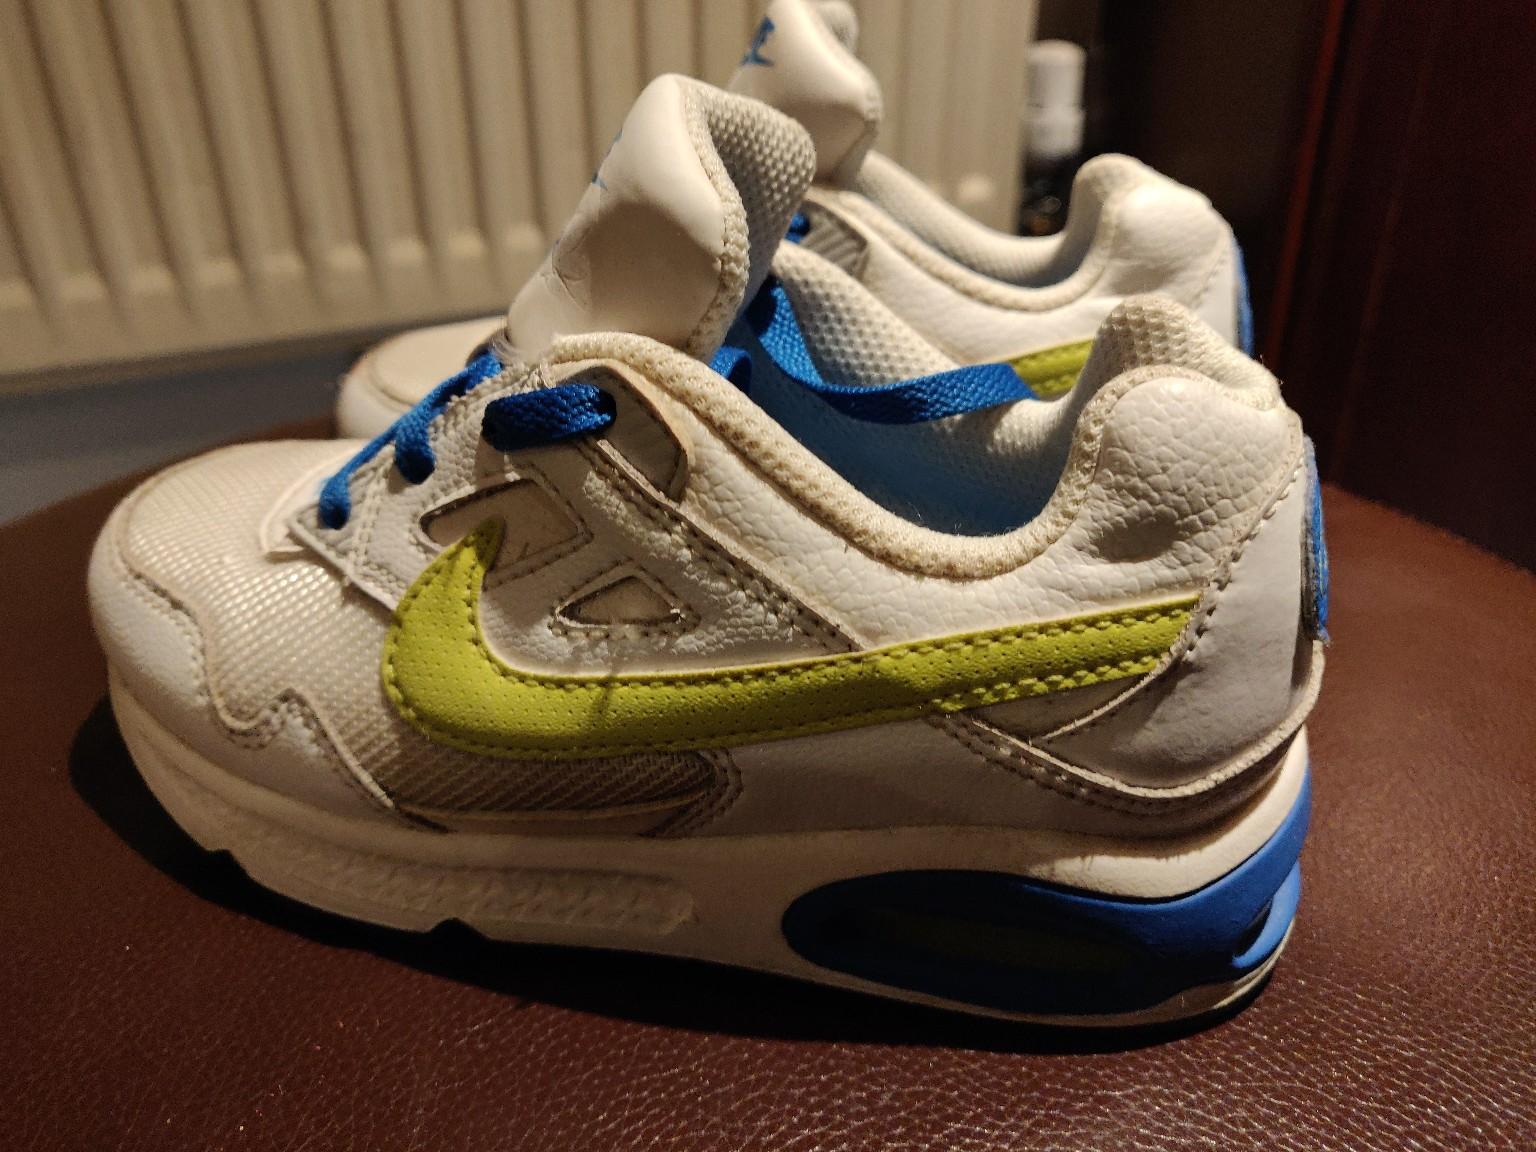 childrens trainers size 9